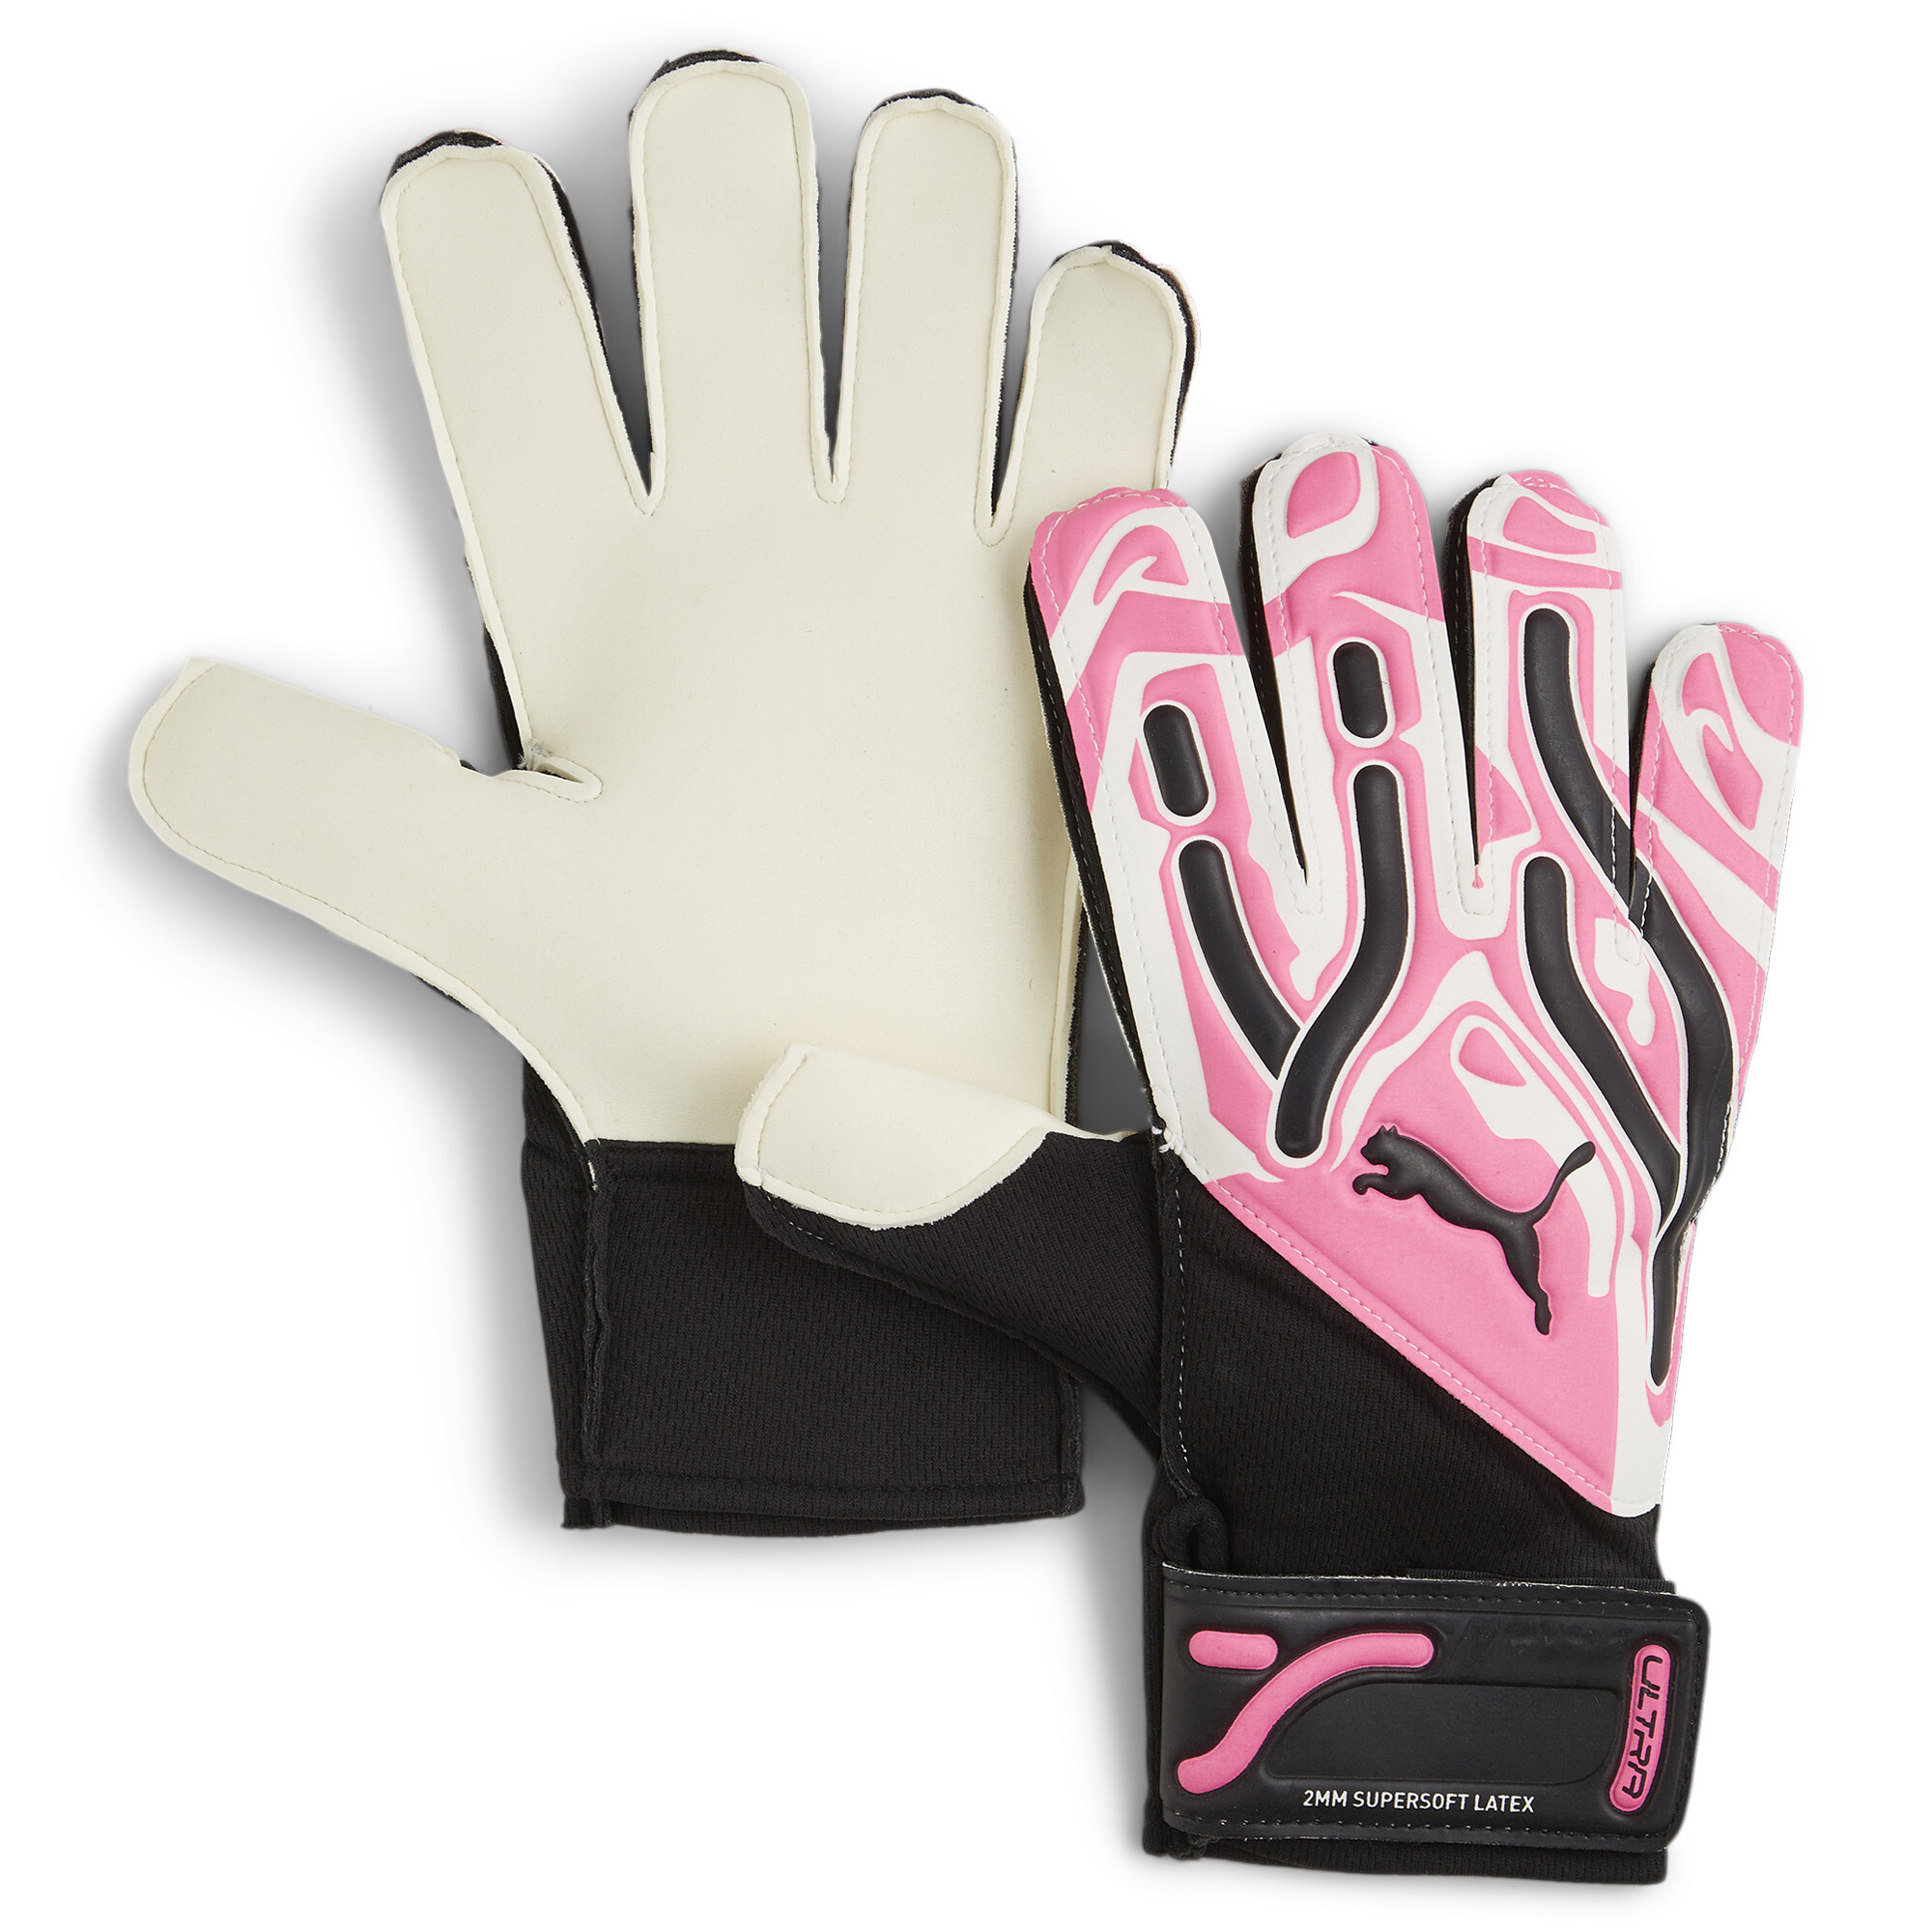 Men's PUMA ULTRA Play RC Goalkeeper Gloves In Pink, Size UK 8